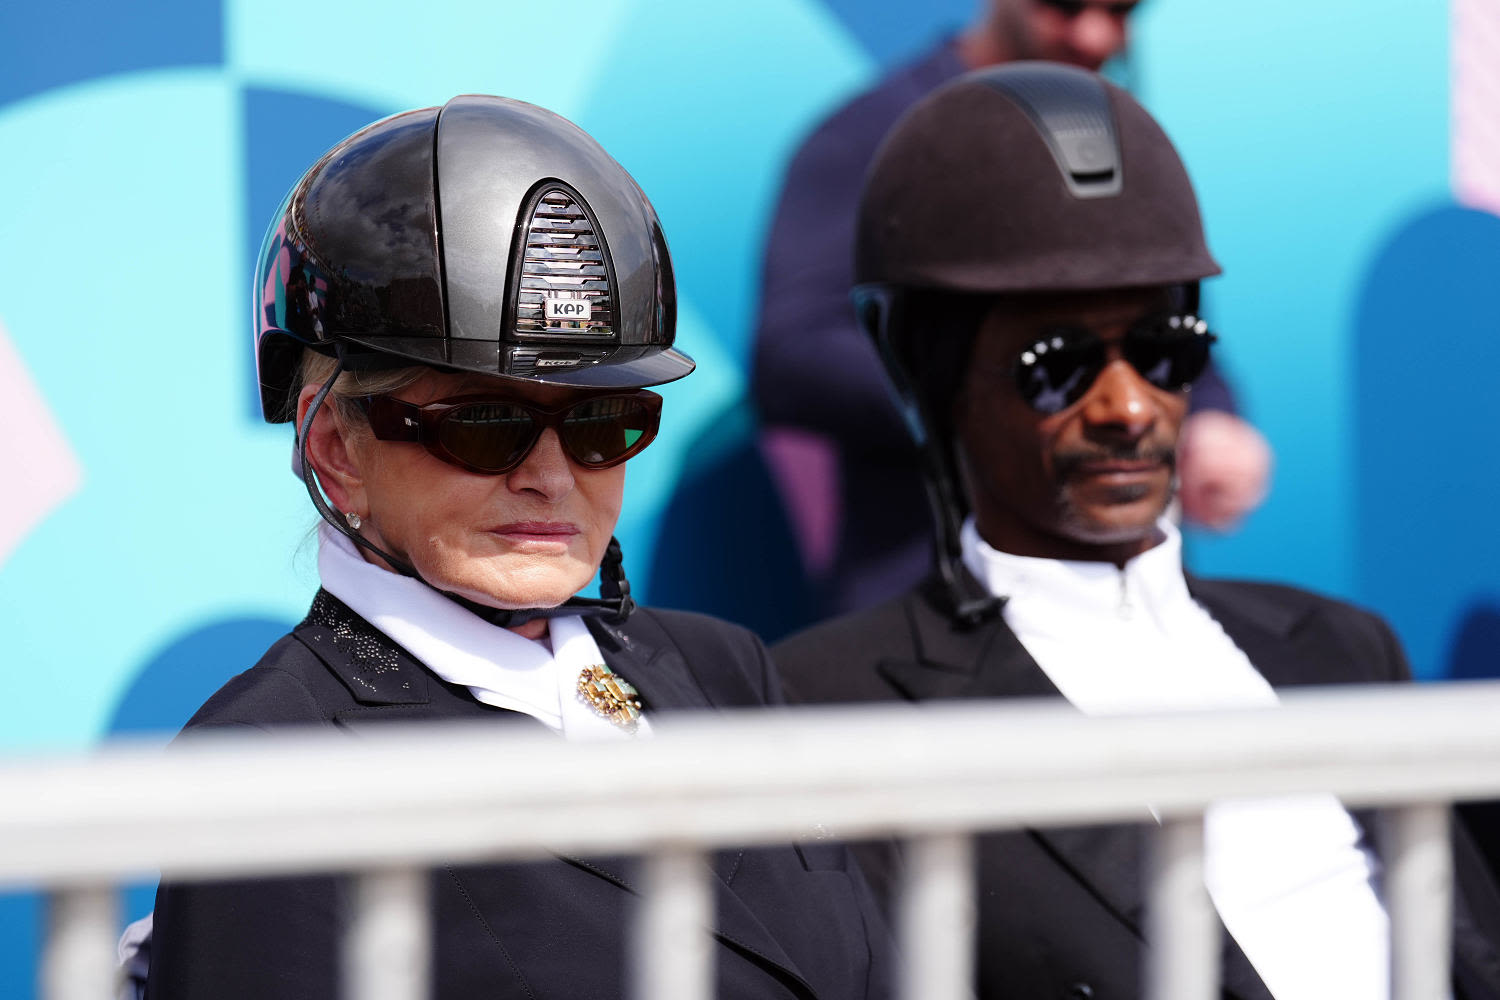 Snoop Dogg and Martha Stewart twin for equestrian event at the Olympics. See the pics